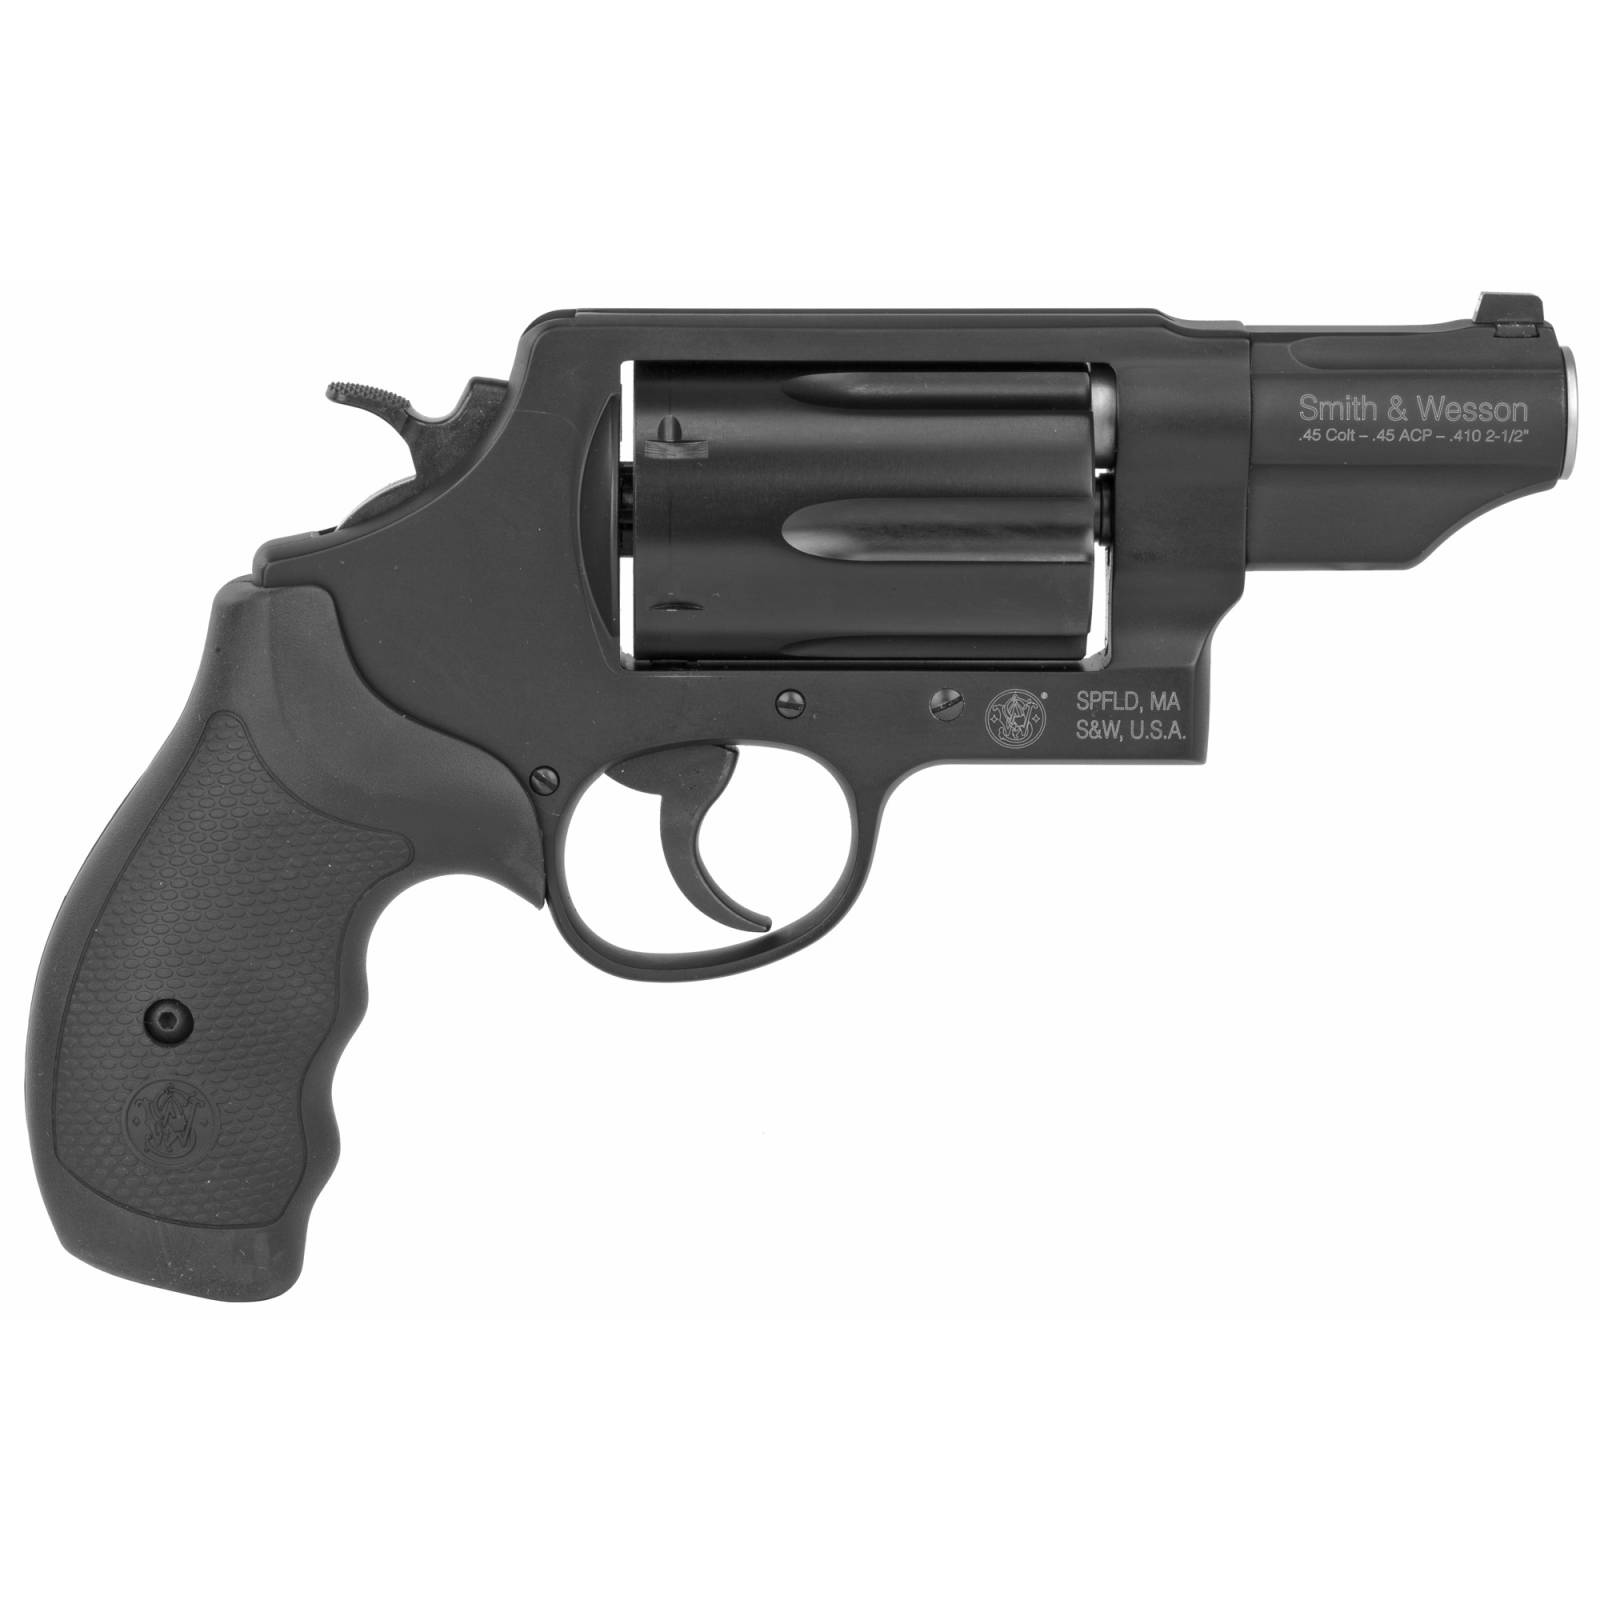 Smith and Wesson Governor 410 Bore/45 Colt/45 ACP 2.75in Barrel 6rd